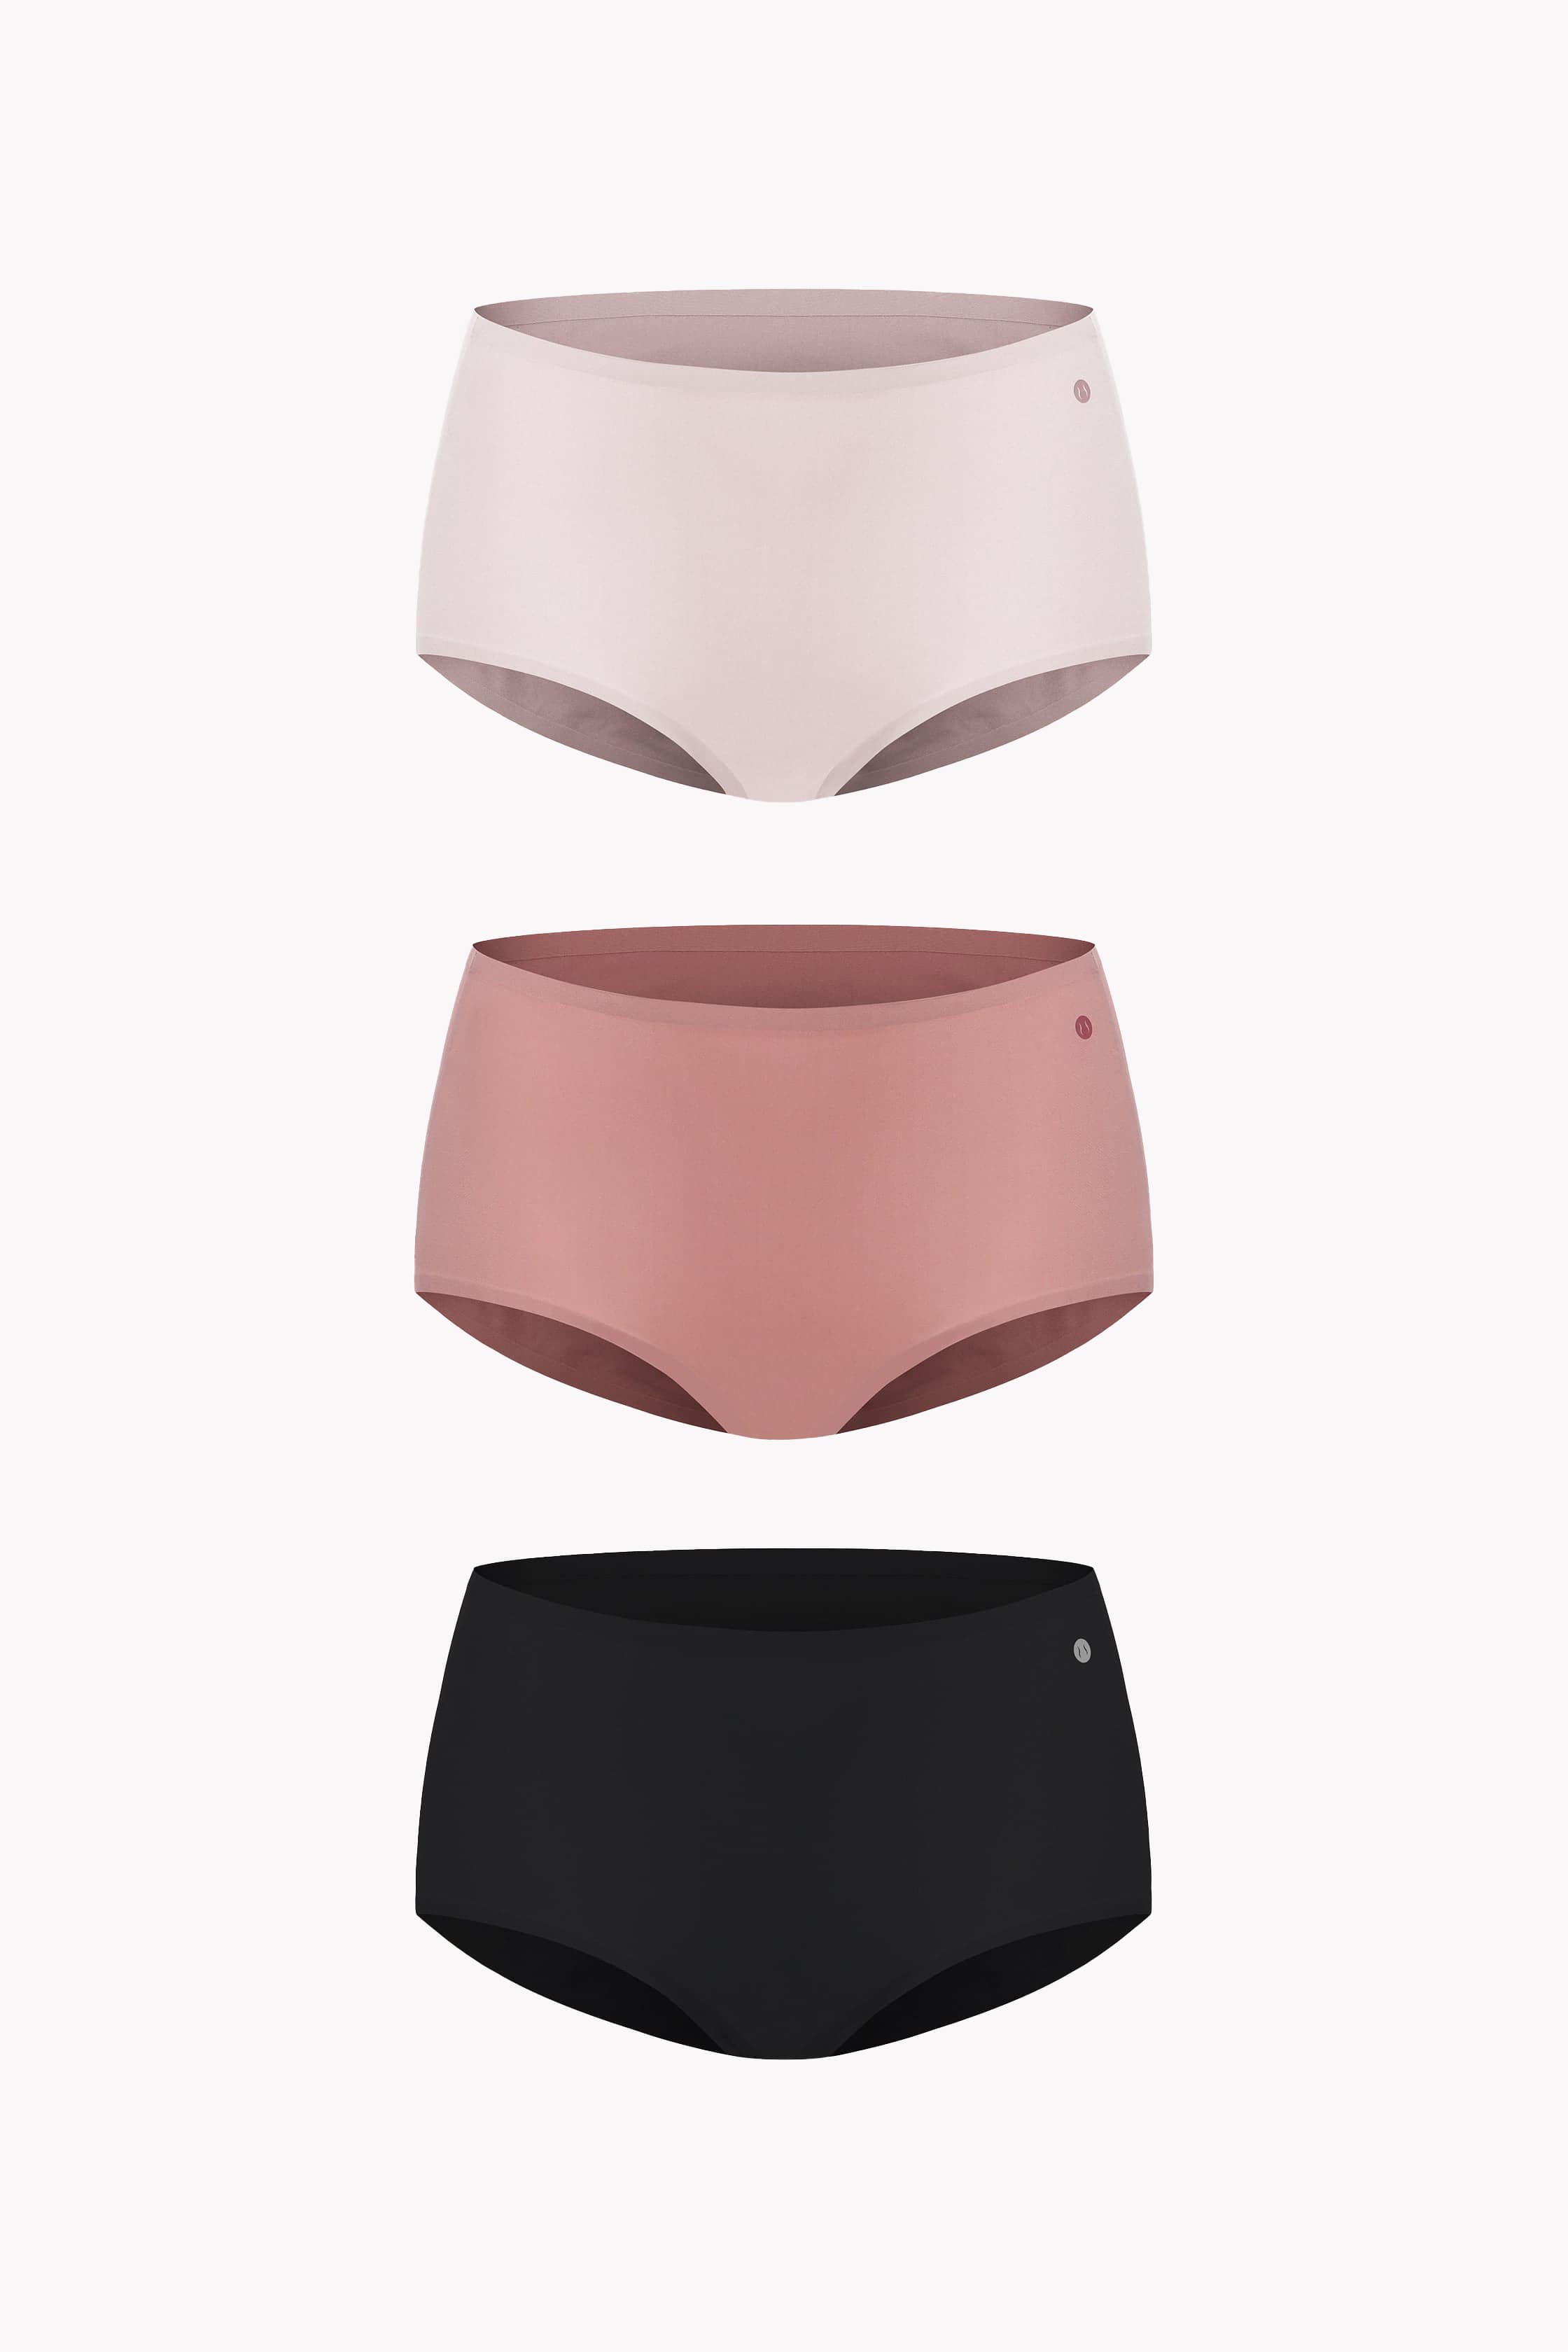 Easy pieces™️ One-Size Briefs 3-PACK